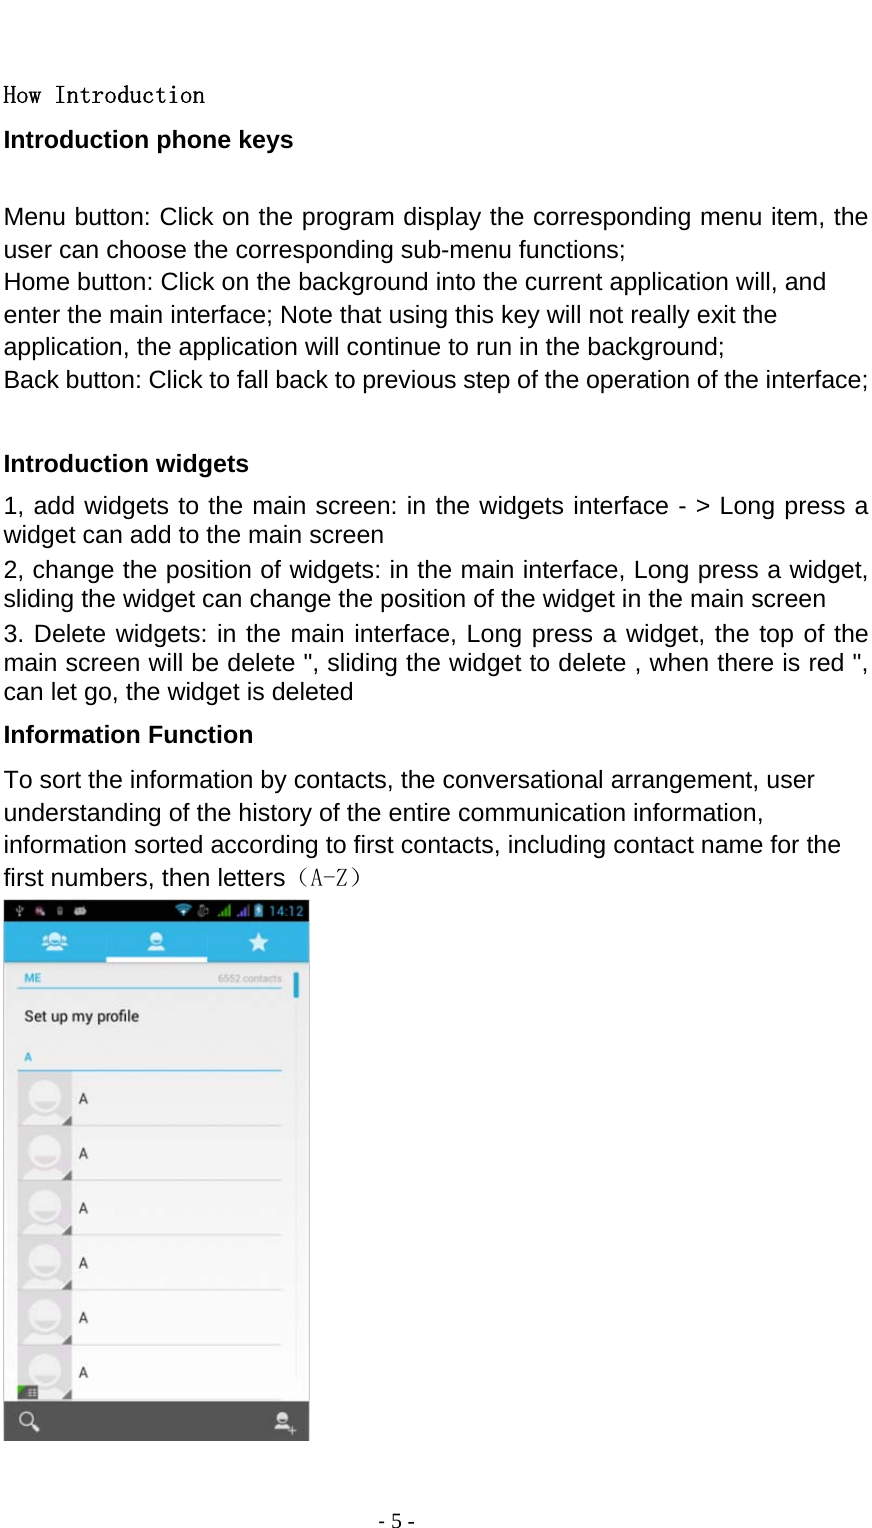                                          ‐ 5 -  How Introduction Introduction phone keys  Menu button: Click on the program display the corresponding menu item, the user can choose the corresponding sub-menu functions; Home button: Click on the background into the current application will, and enter the main interface; Note that using this key will not really exit the application, the application will continue to run in the background; Back button: Click to fall back to previous step of the operation of the interface;  Introduction widgets 1, add widgets to the main screen: in the widgets interface - &gt; Long press a widget can add to the main screen 2, change the position of widgets: in the main interface, Long press a widget, sliding the widget can change the position of the widget in the main screen   3. Delete widgets: in the main interface, Long press a widget, the top of the main screen will be delete &quot;, sliding the widget to delete , when there is red &quot;, can let go, the widget is deleted Information Function To sort the information by contacts, the conversational arrangement, user understanding of the history of the entire communication information, information sorted according to first contacts, including contact name for the first numbers, then letters（A-Z）   